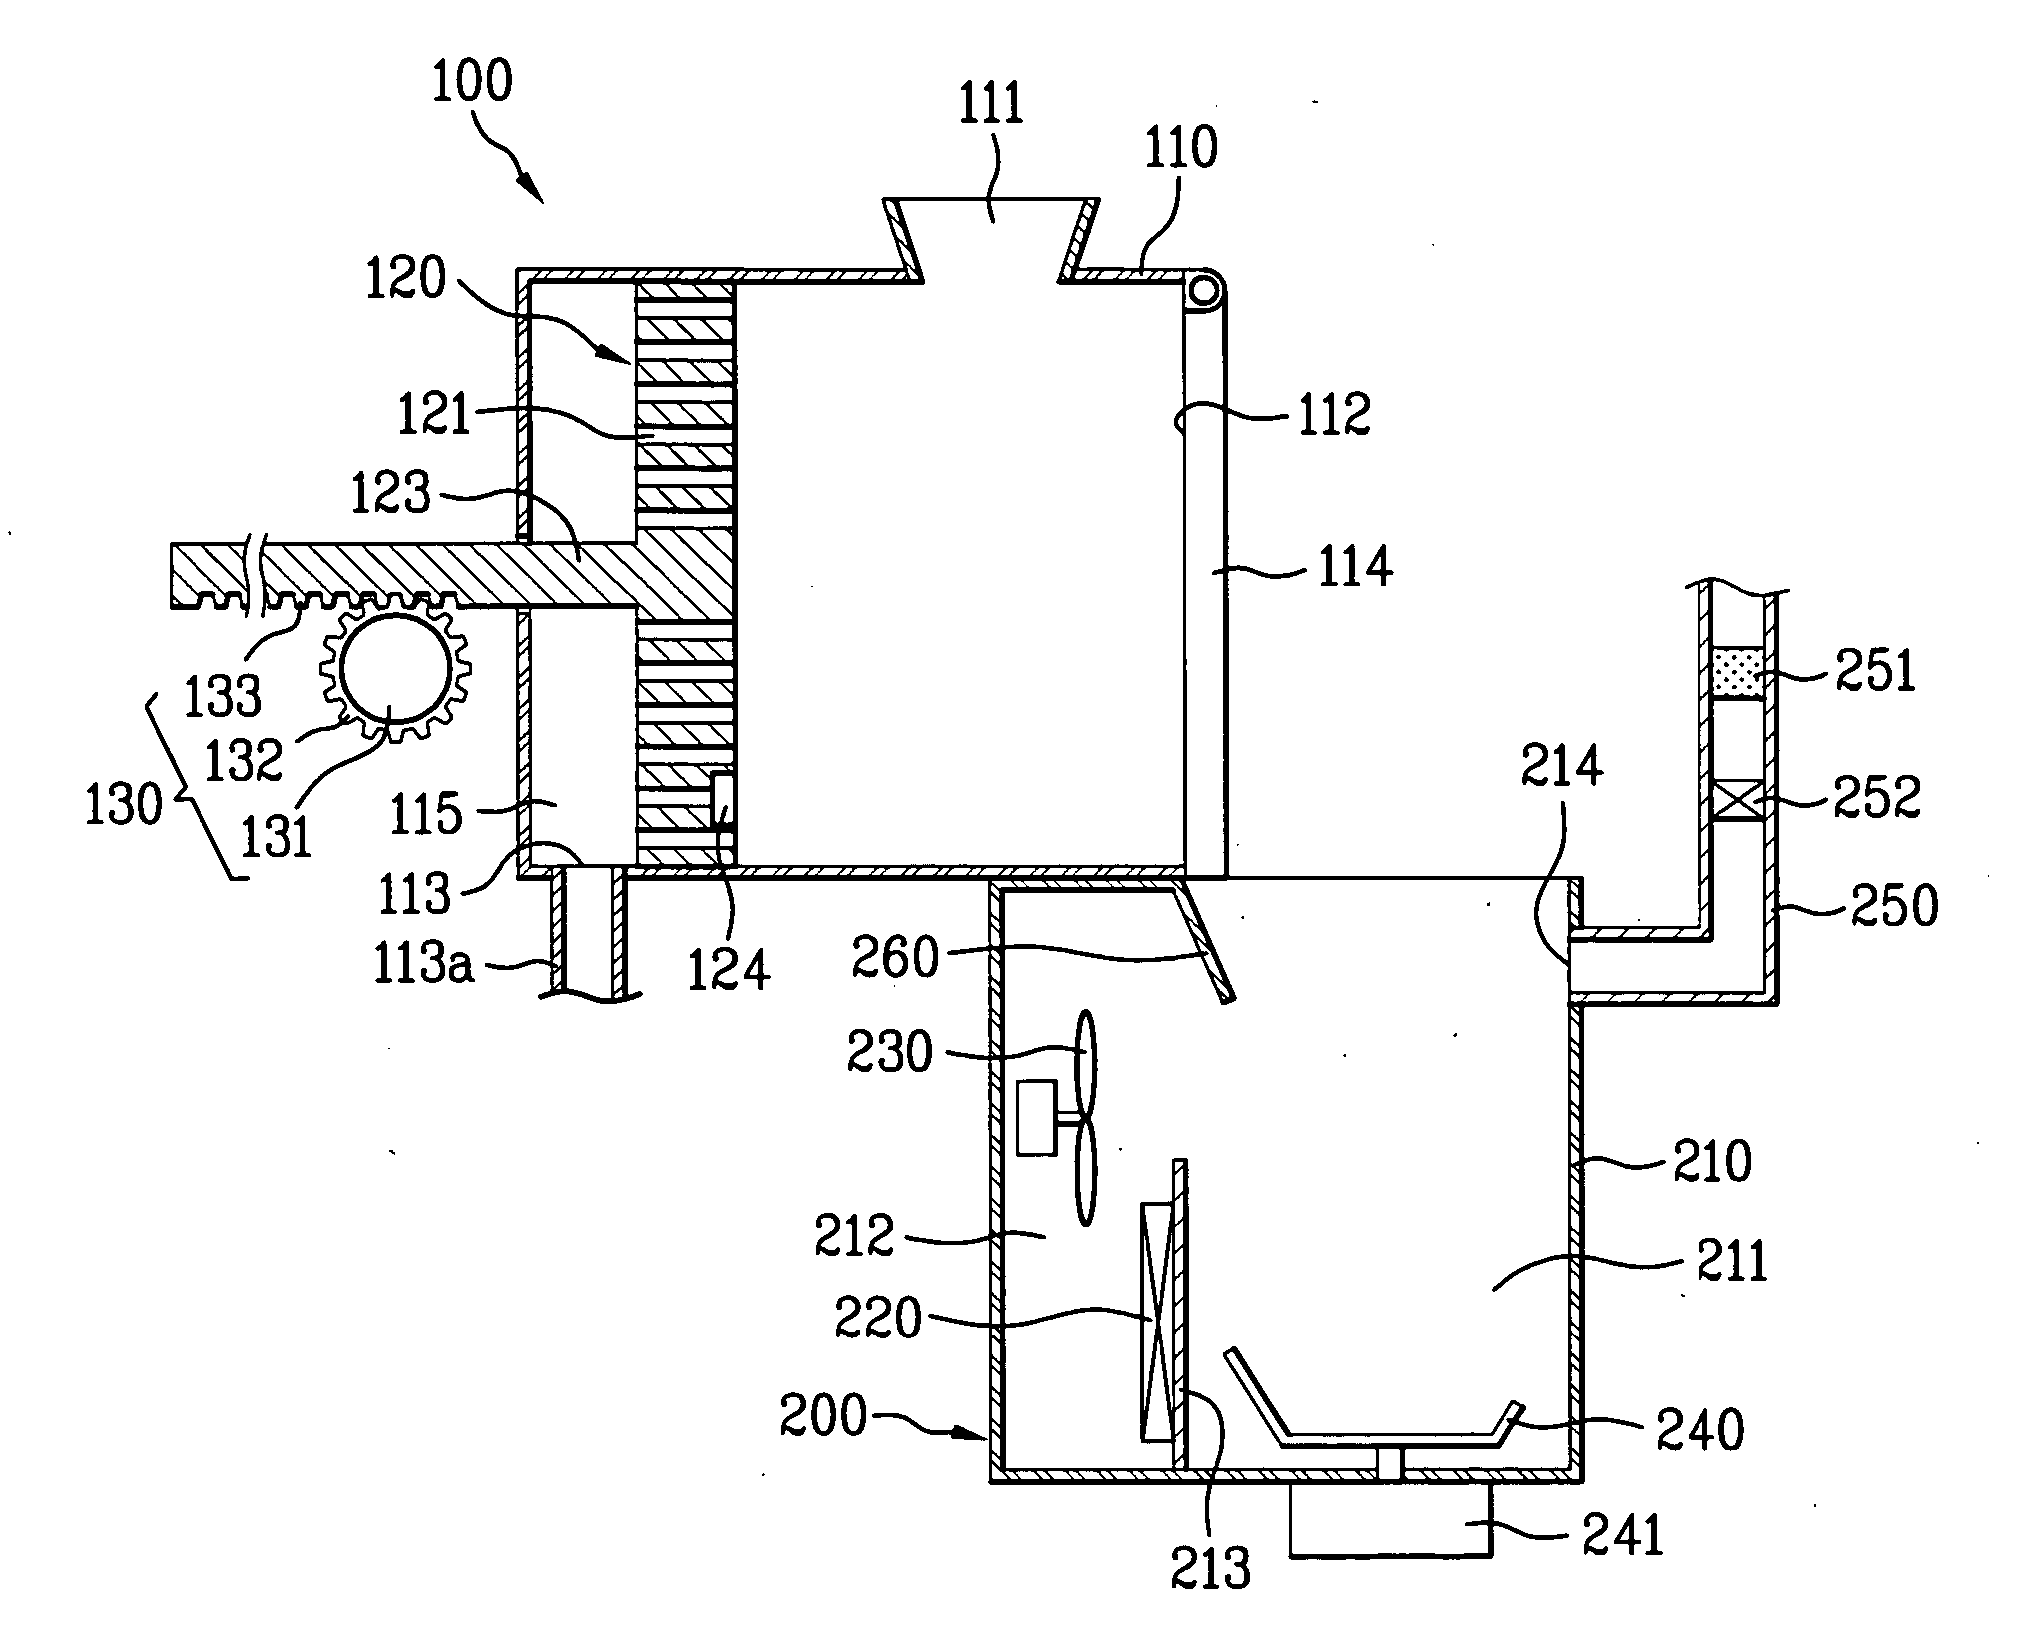 Apparatus for processing oranic substance